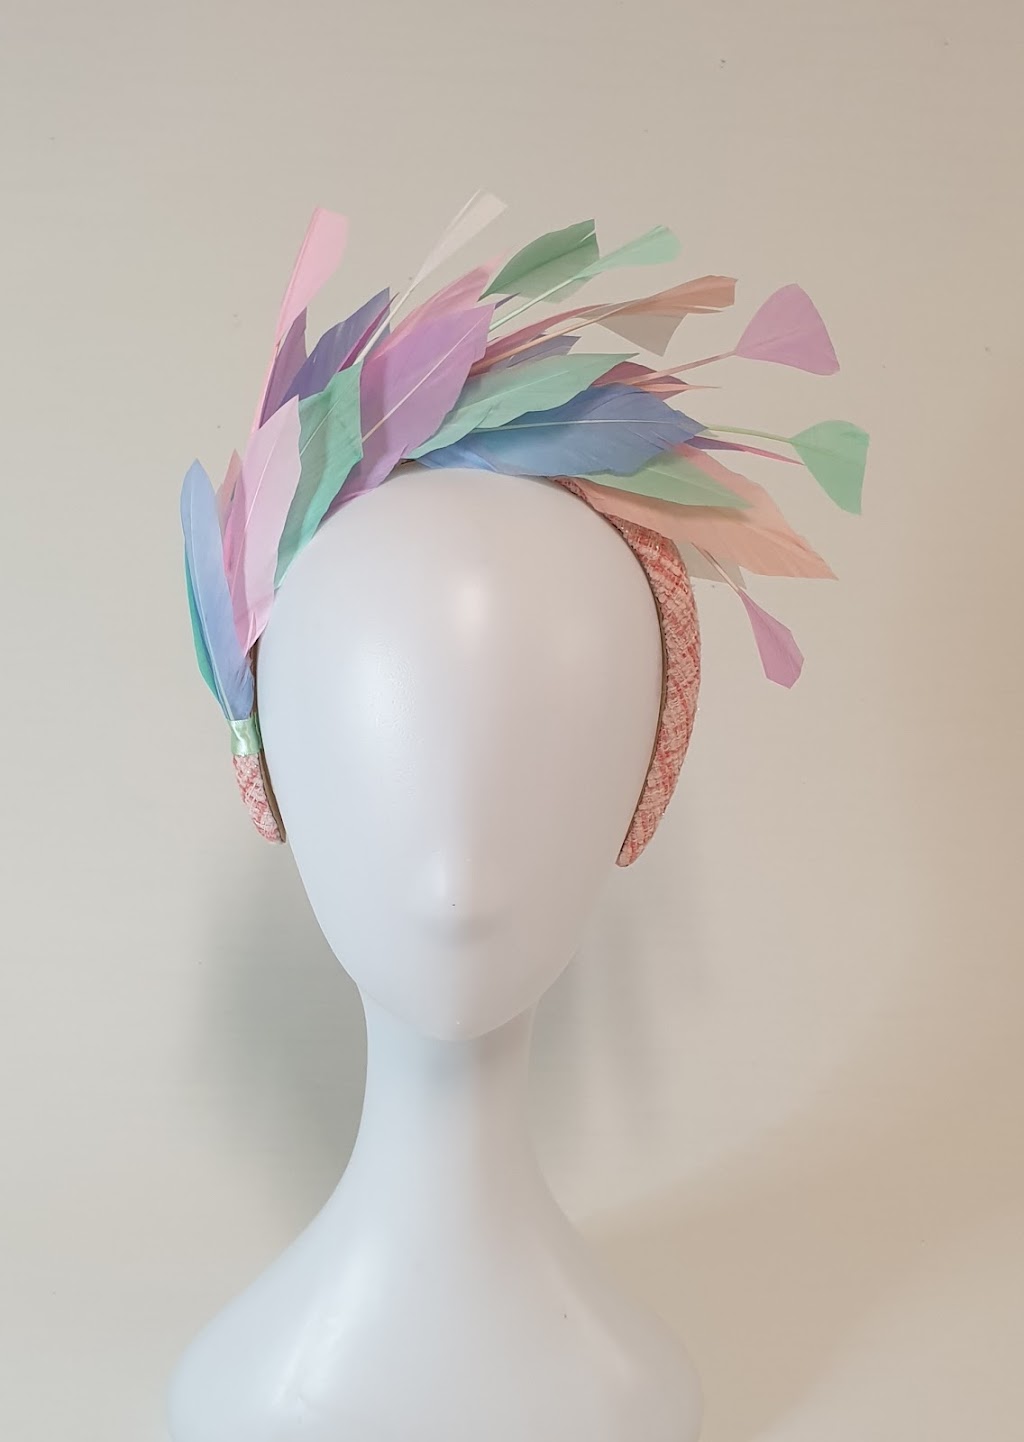 Designs by Reg - Millinery | clothing store | 3 William St, Boonah QLD 4310, Australia | 0408354729 OR +61 408 354 729